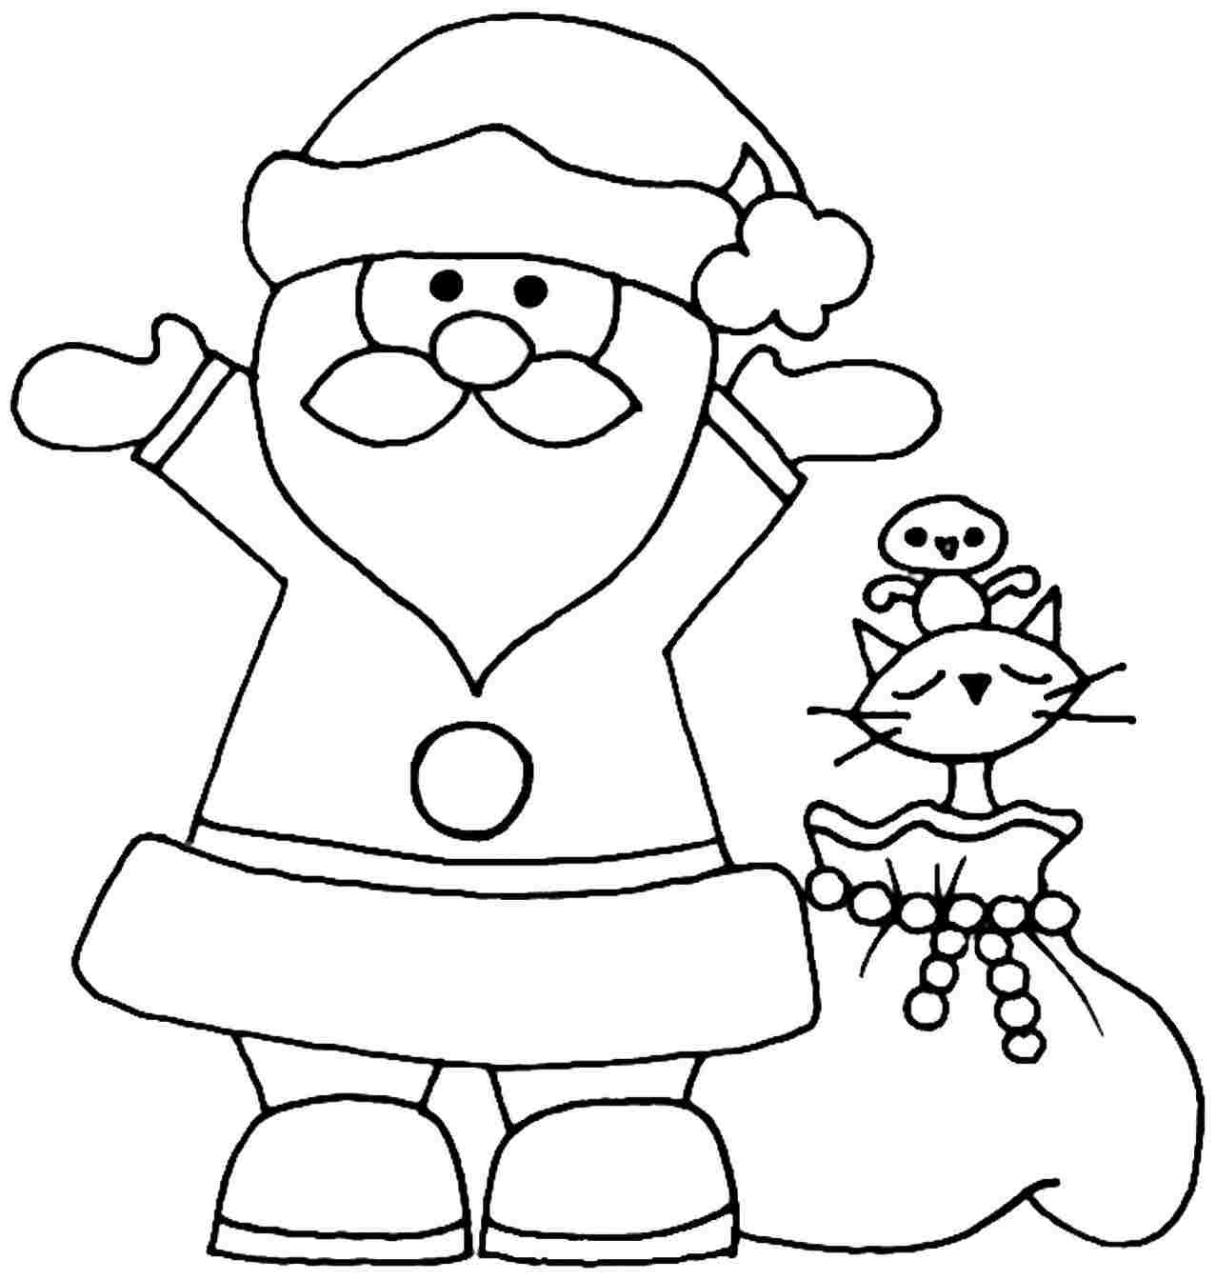 The Best Santa Coloring Pages Simple Ideas